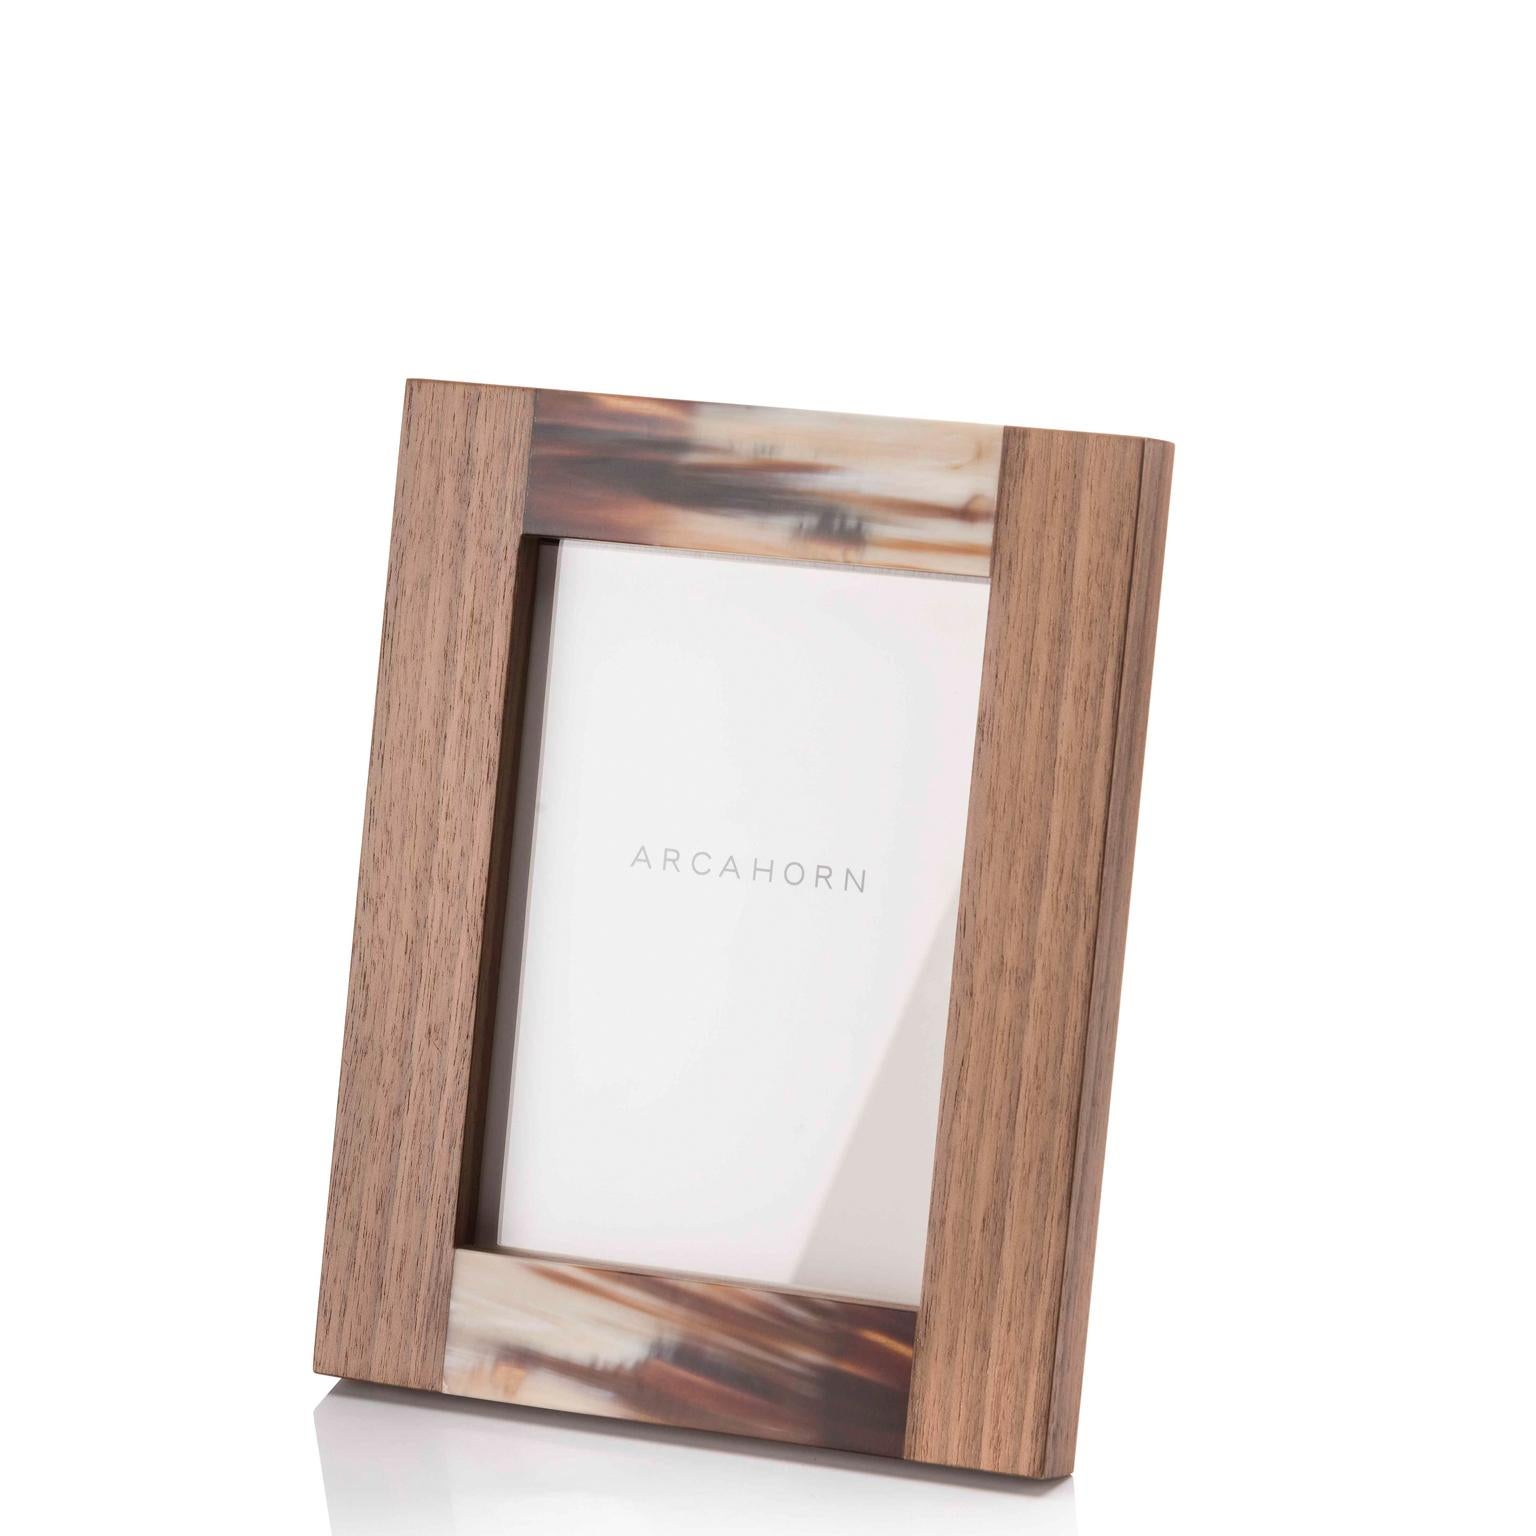 Featuring a classic rectangular shape, the Medea picture frame in Canaletto Walnut veneer is given an elegant, textured effect by the striated brown-veined nuances of matte Corno Italiano inlays. Available in two different sizes, Medea will display